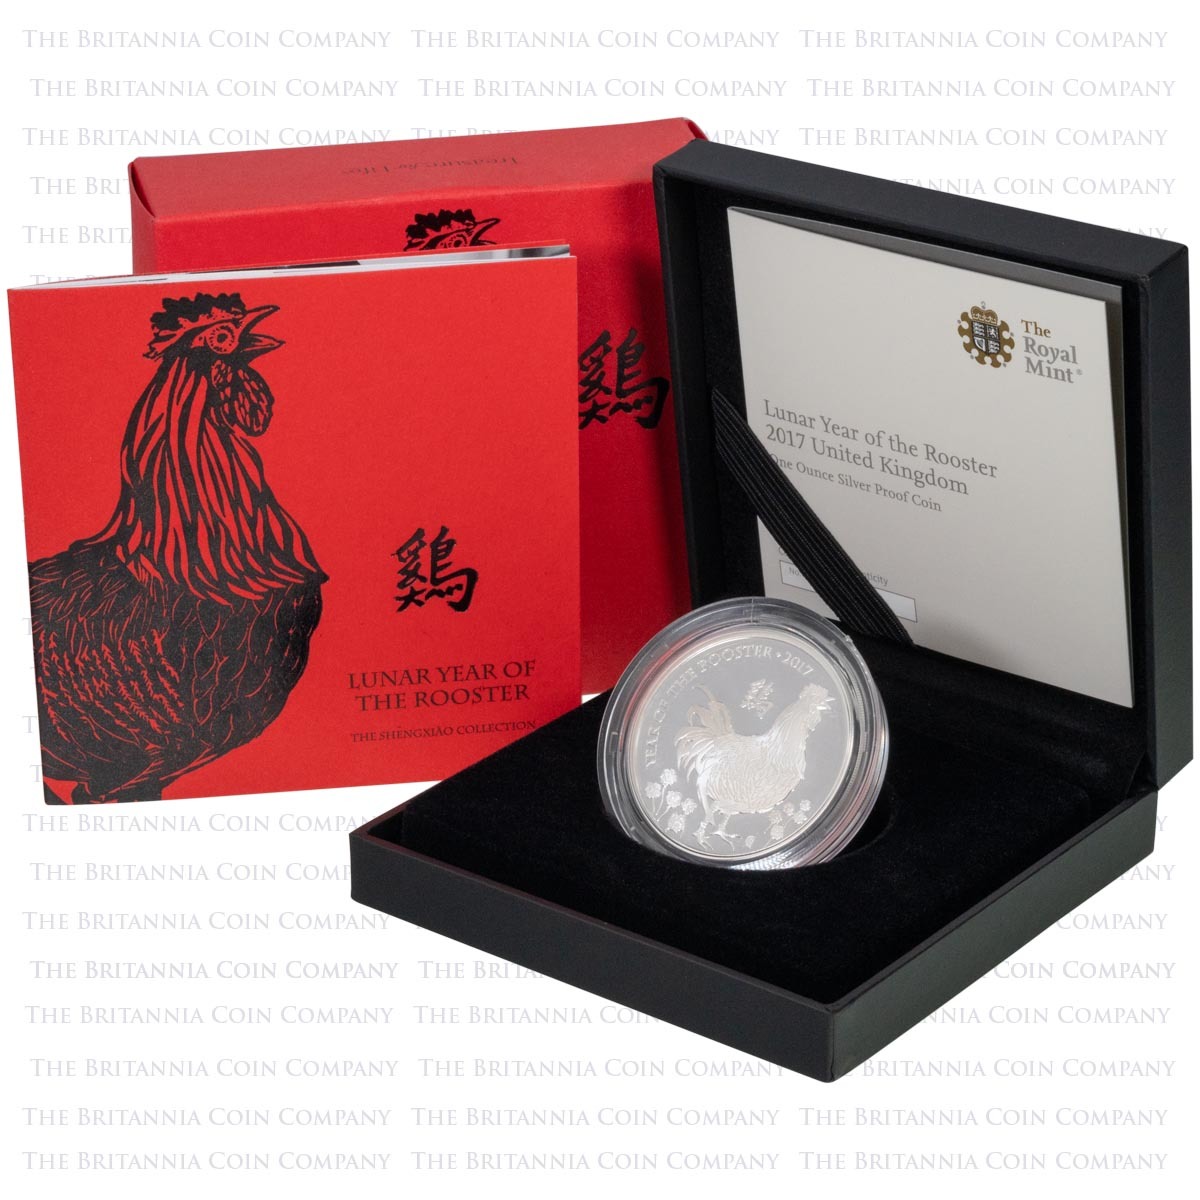 UKR17SP 2017 Lunar Year Of The Rooster One Ounce Silver Proof Coin Boxed